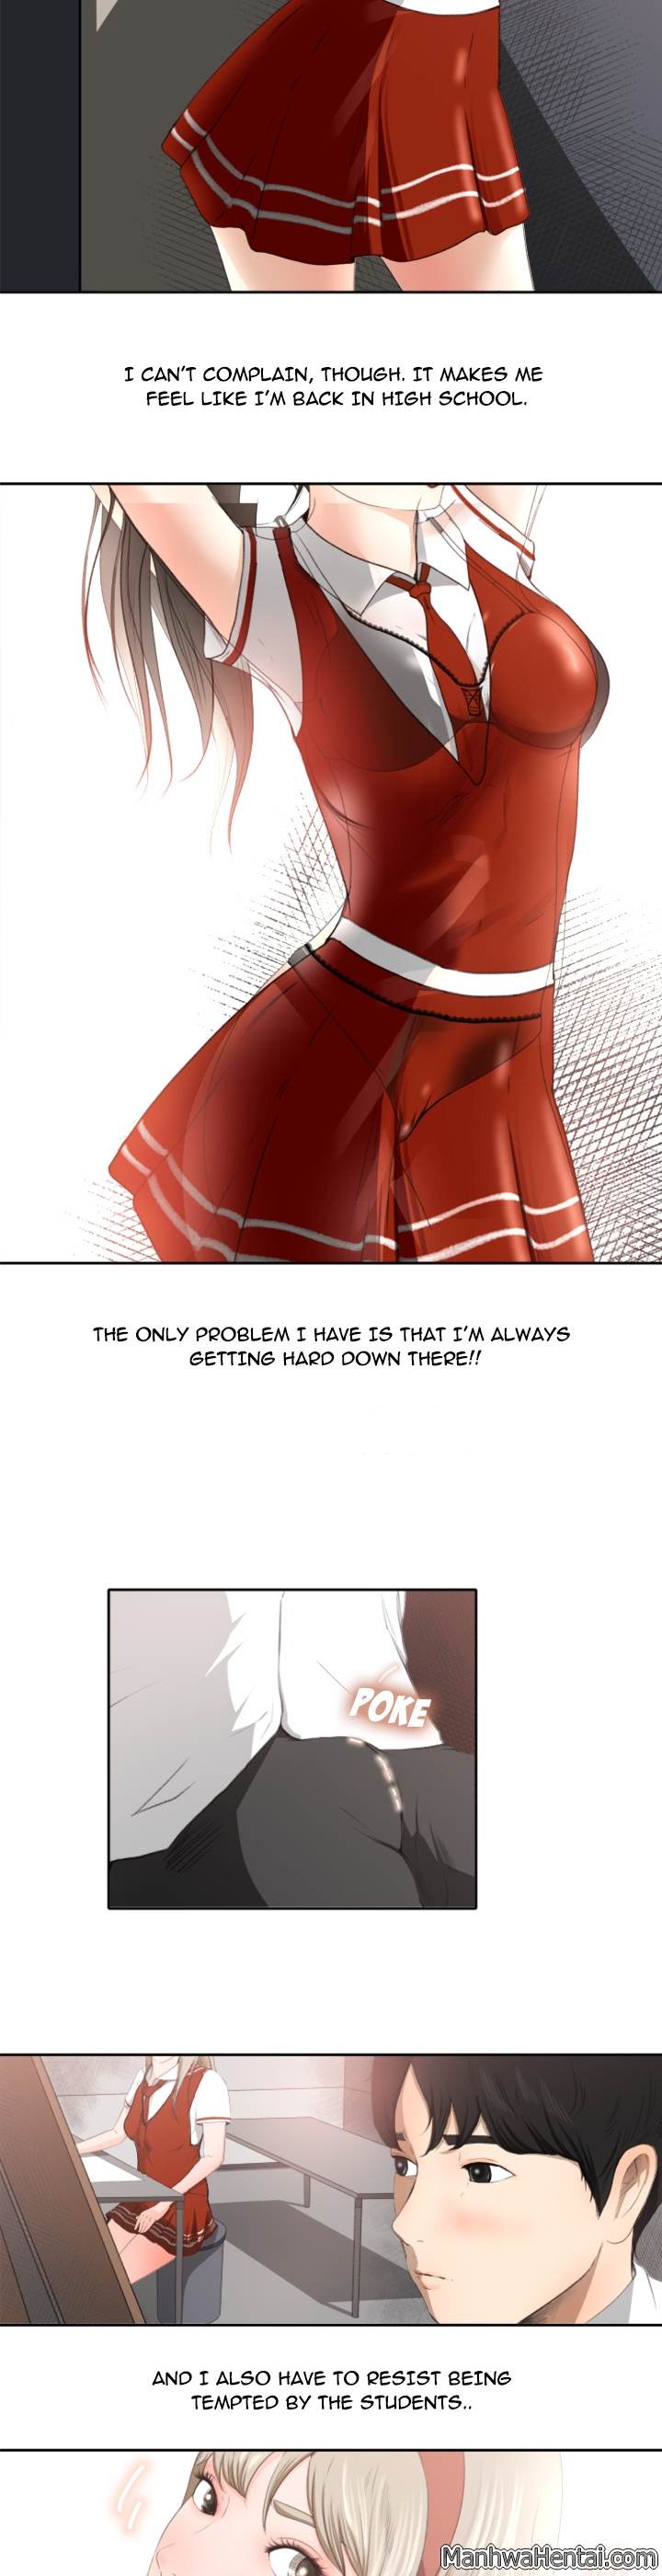 Inside the Uniform - Chapter 1 Page 2